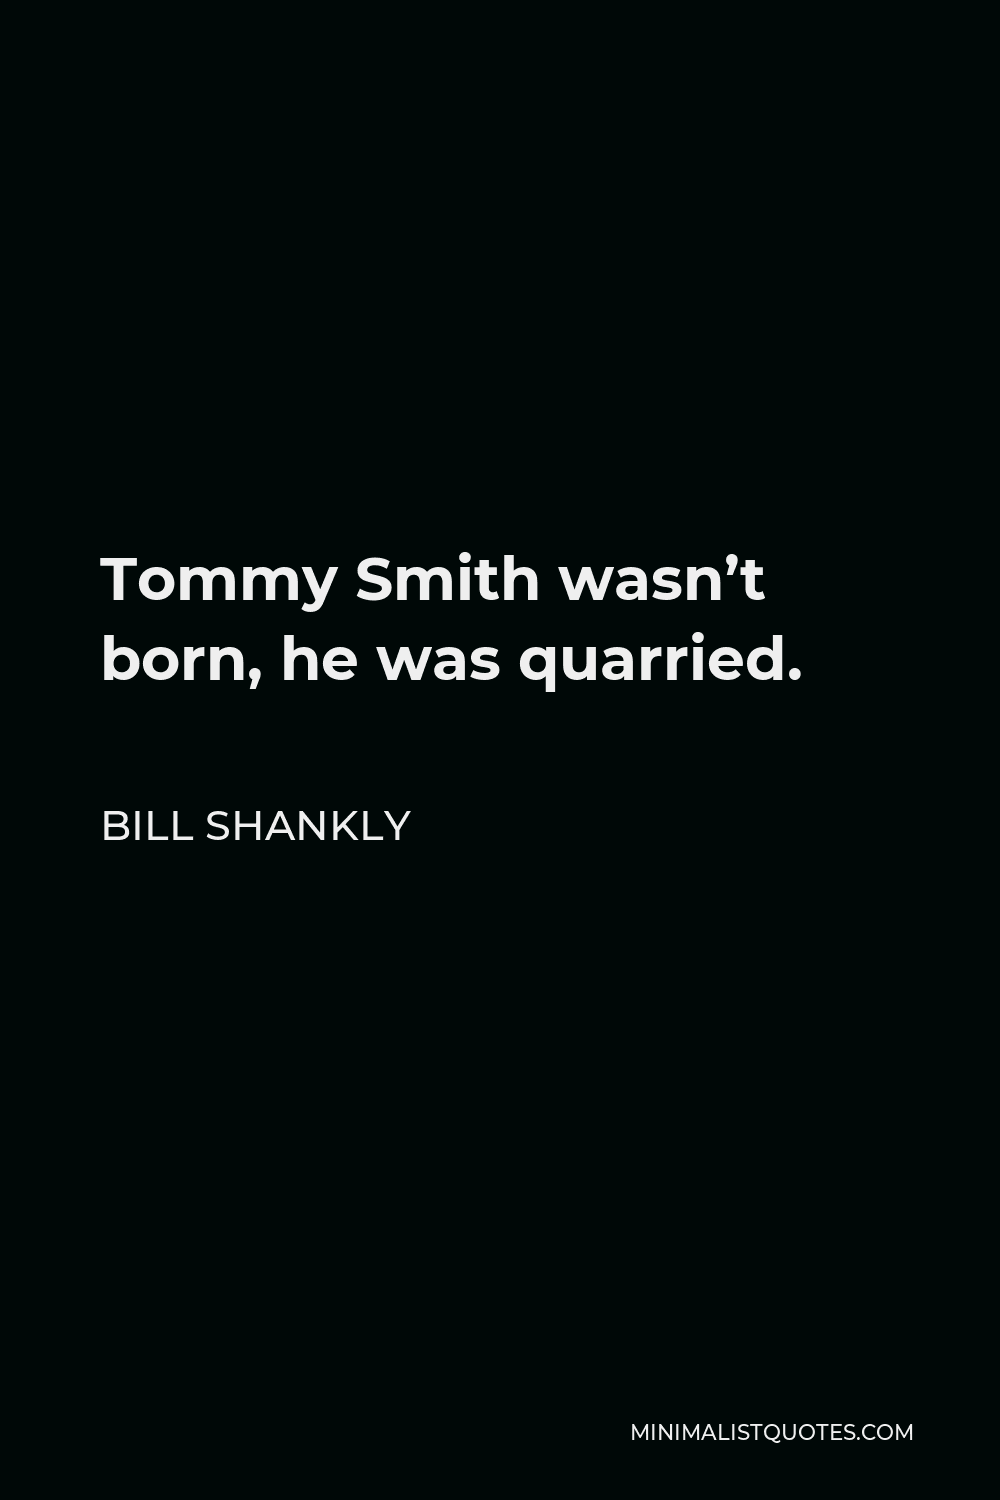 Bill Shankly Quote - Tommy Smith wasn’t born, he was quarried.